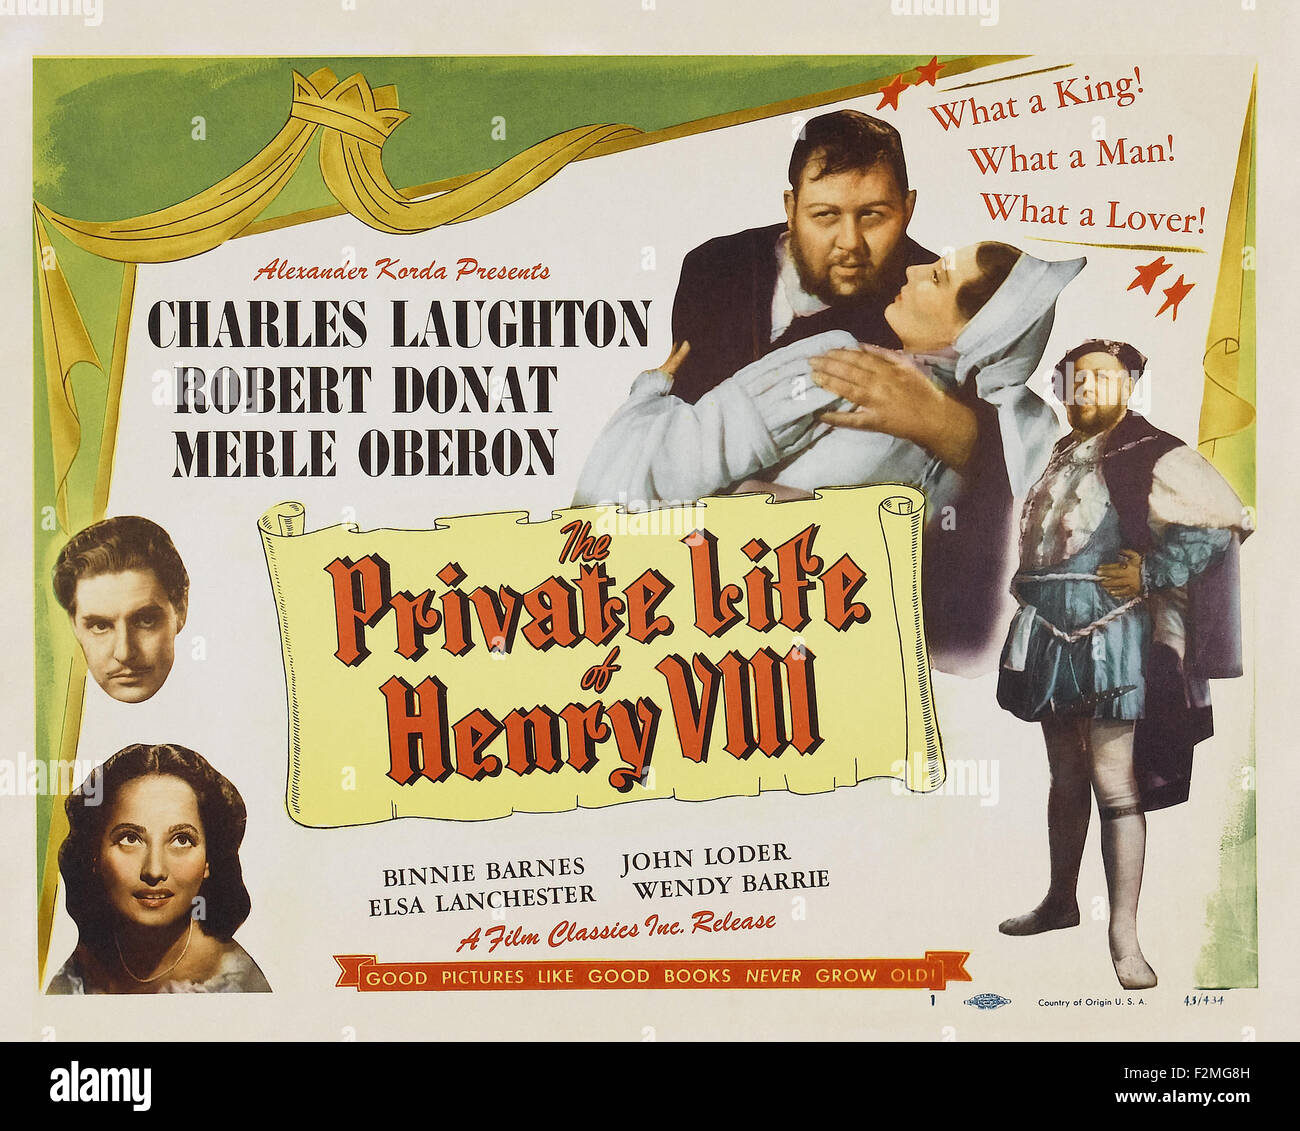 The Private Life of Henry VIII - Filmplakat Stockfoto